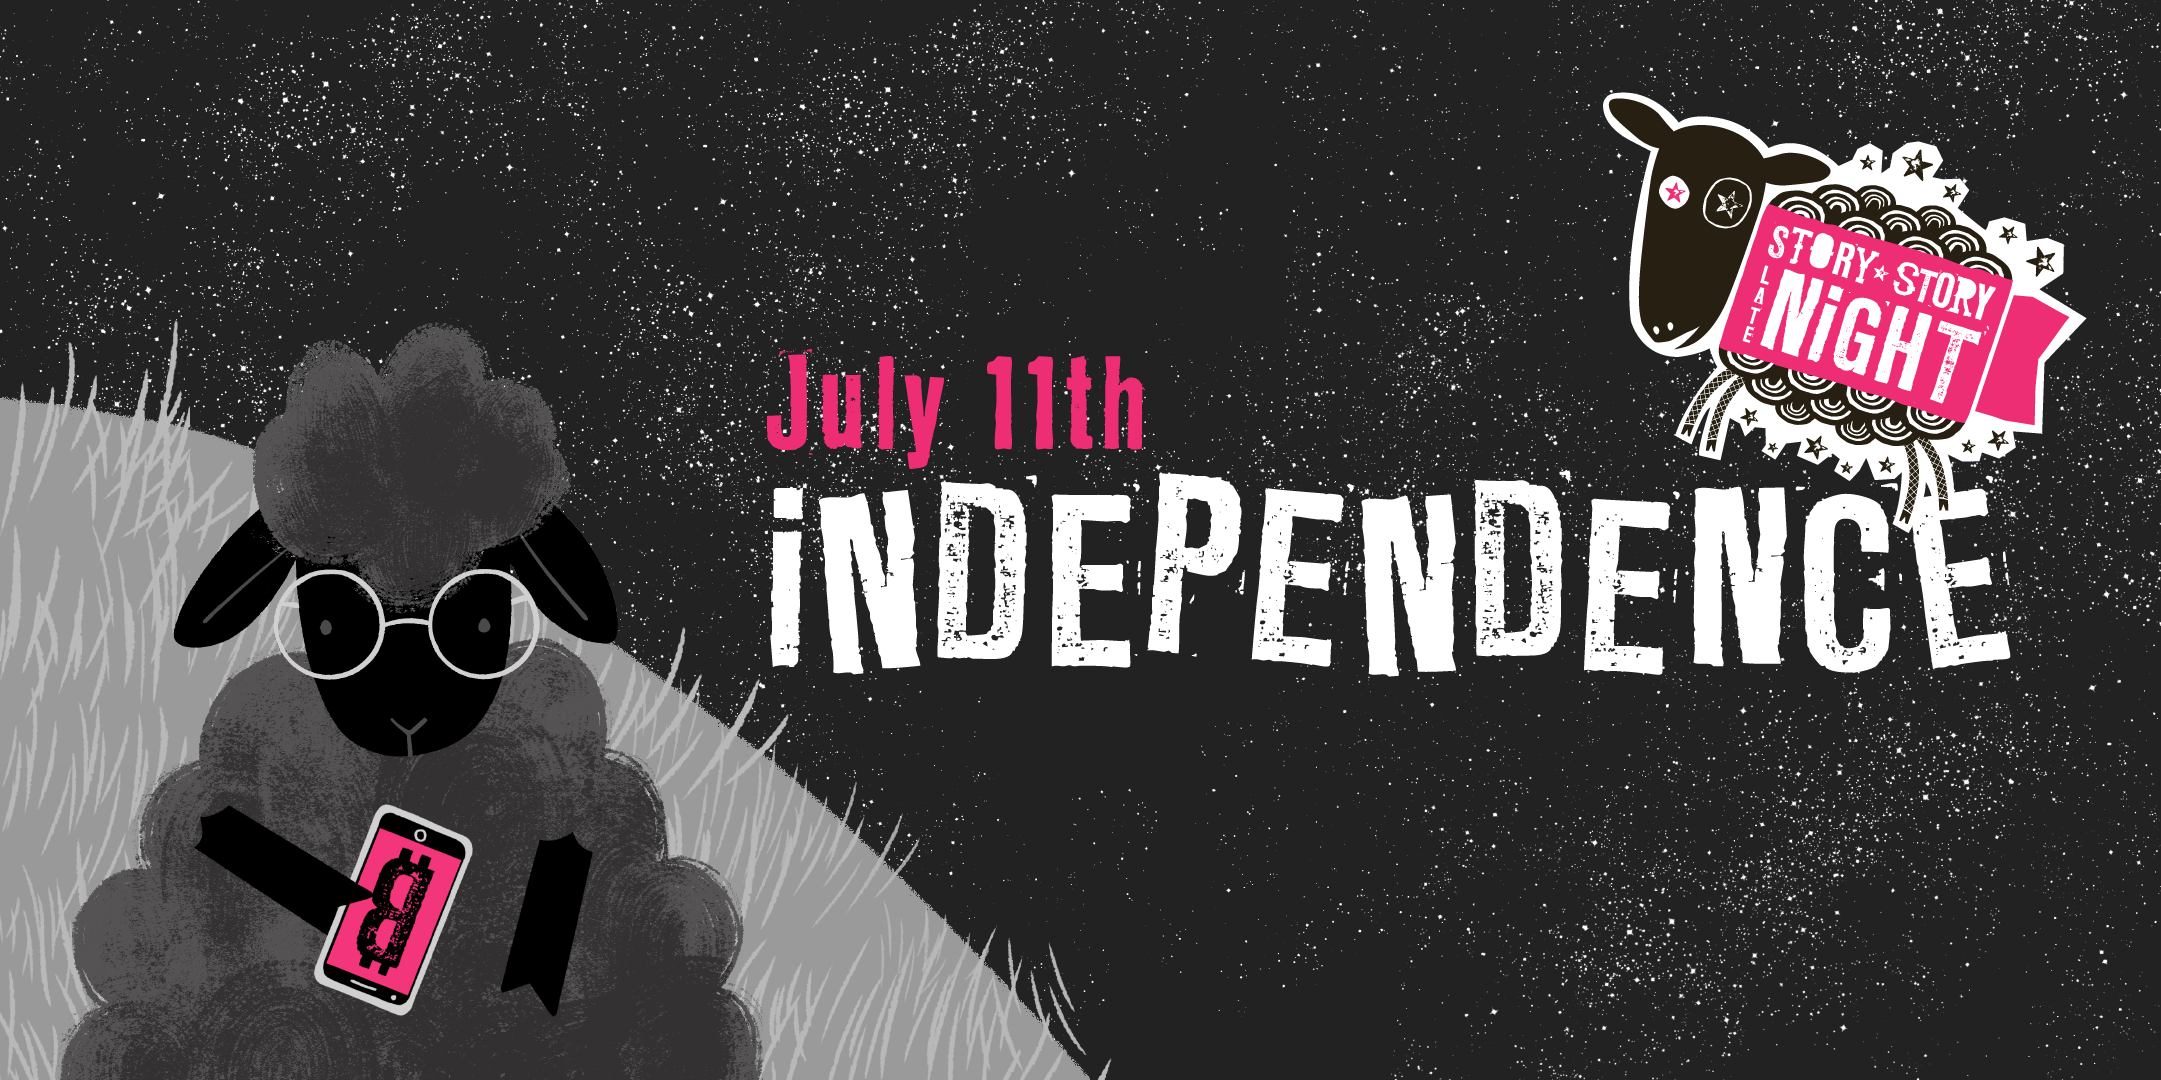 theme of show on July 11 is Independence